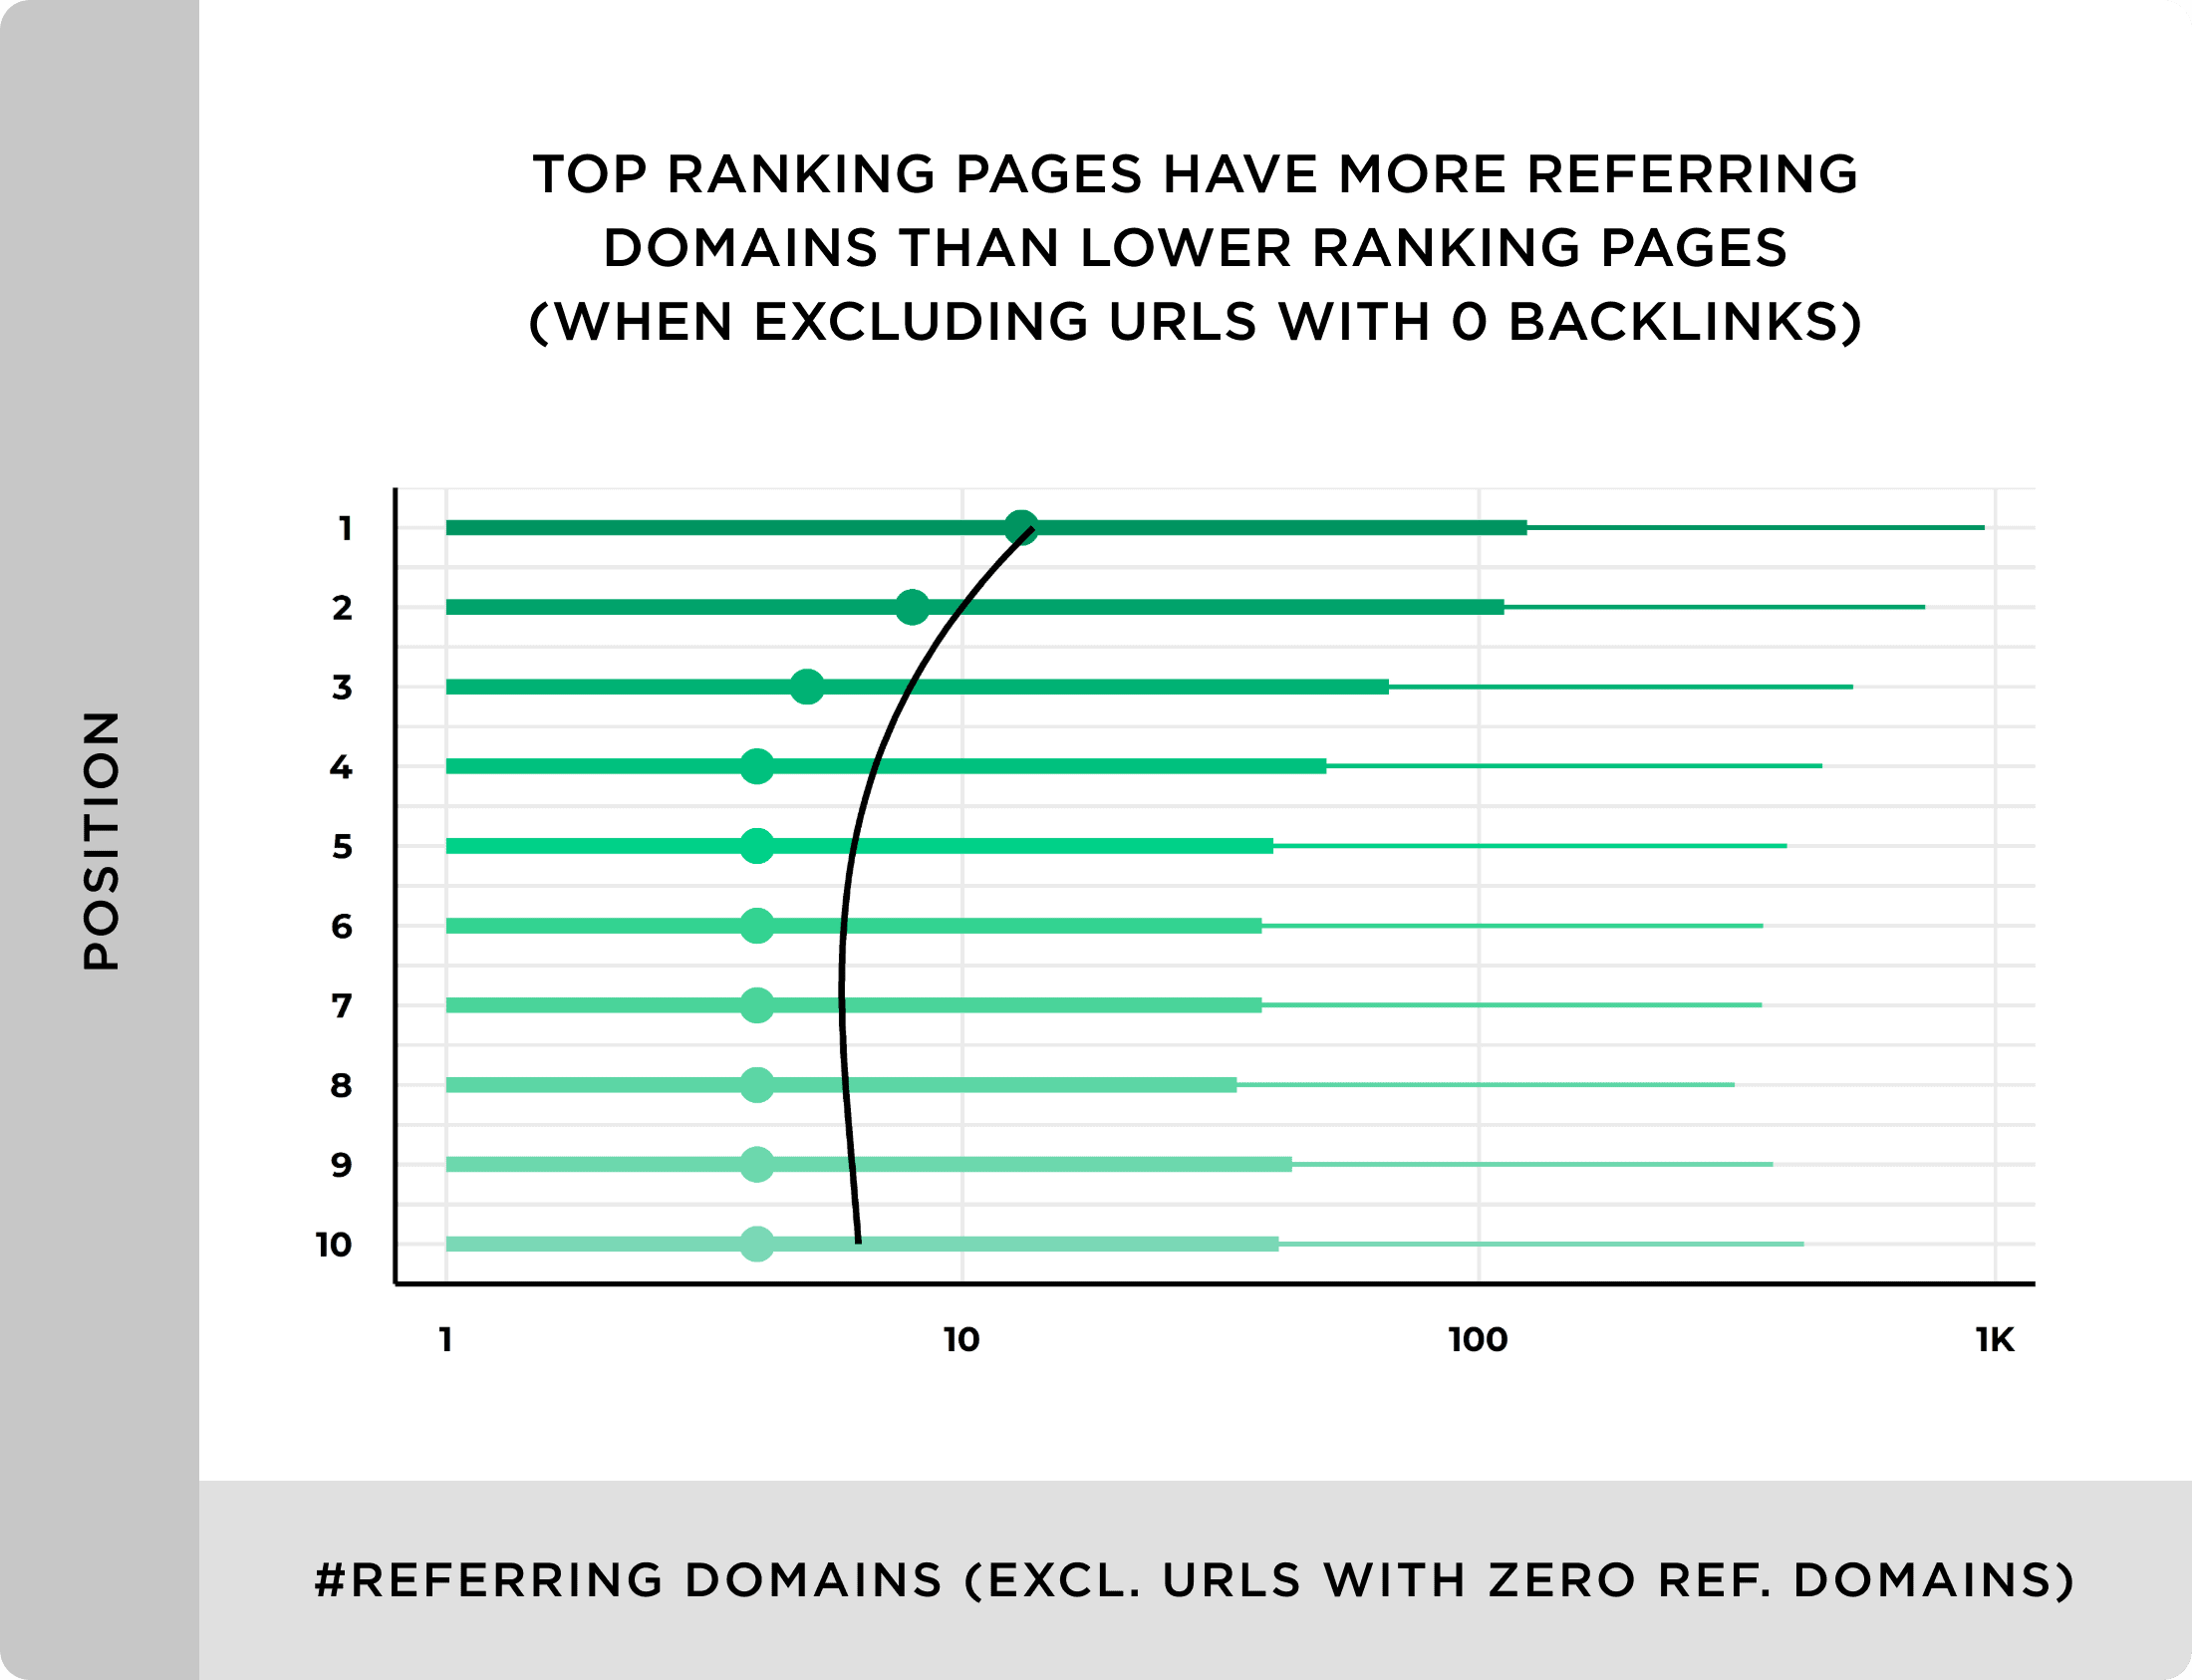 Top ranking pages have more referring domains than lower ranking pages